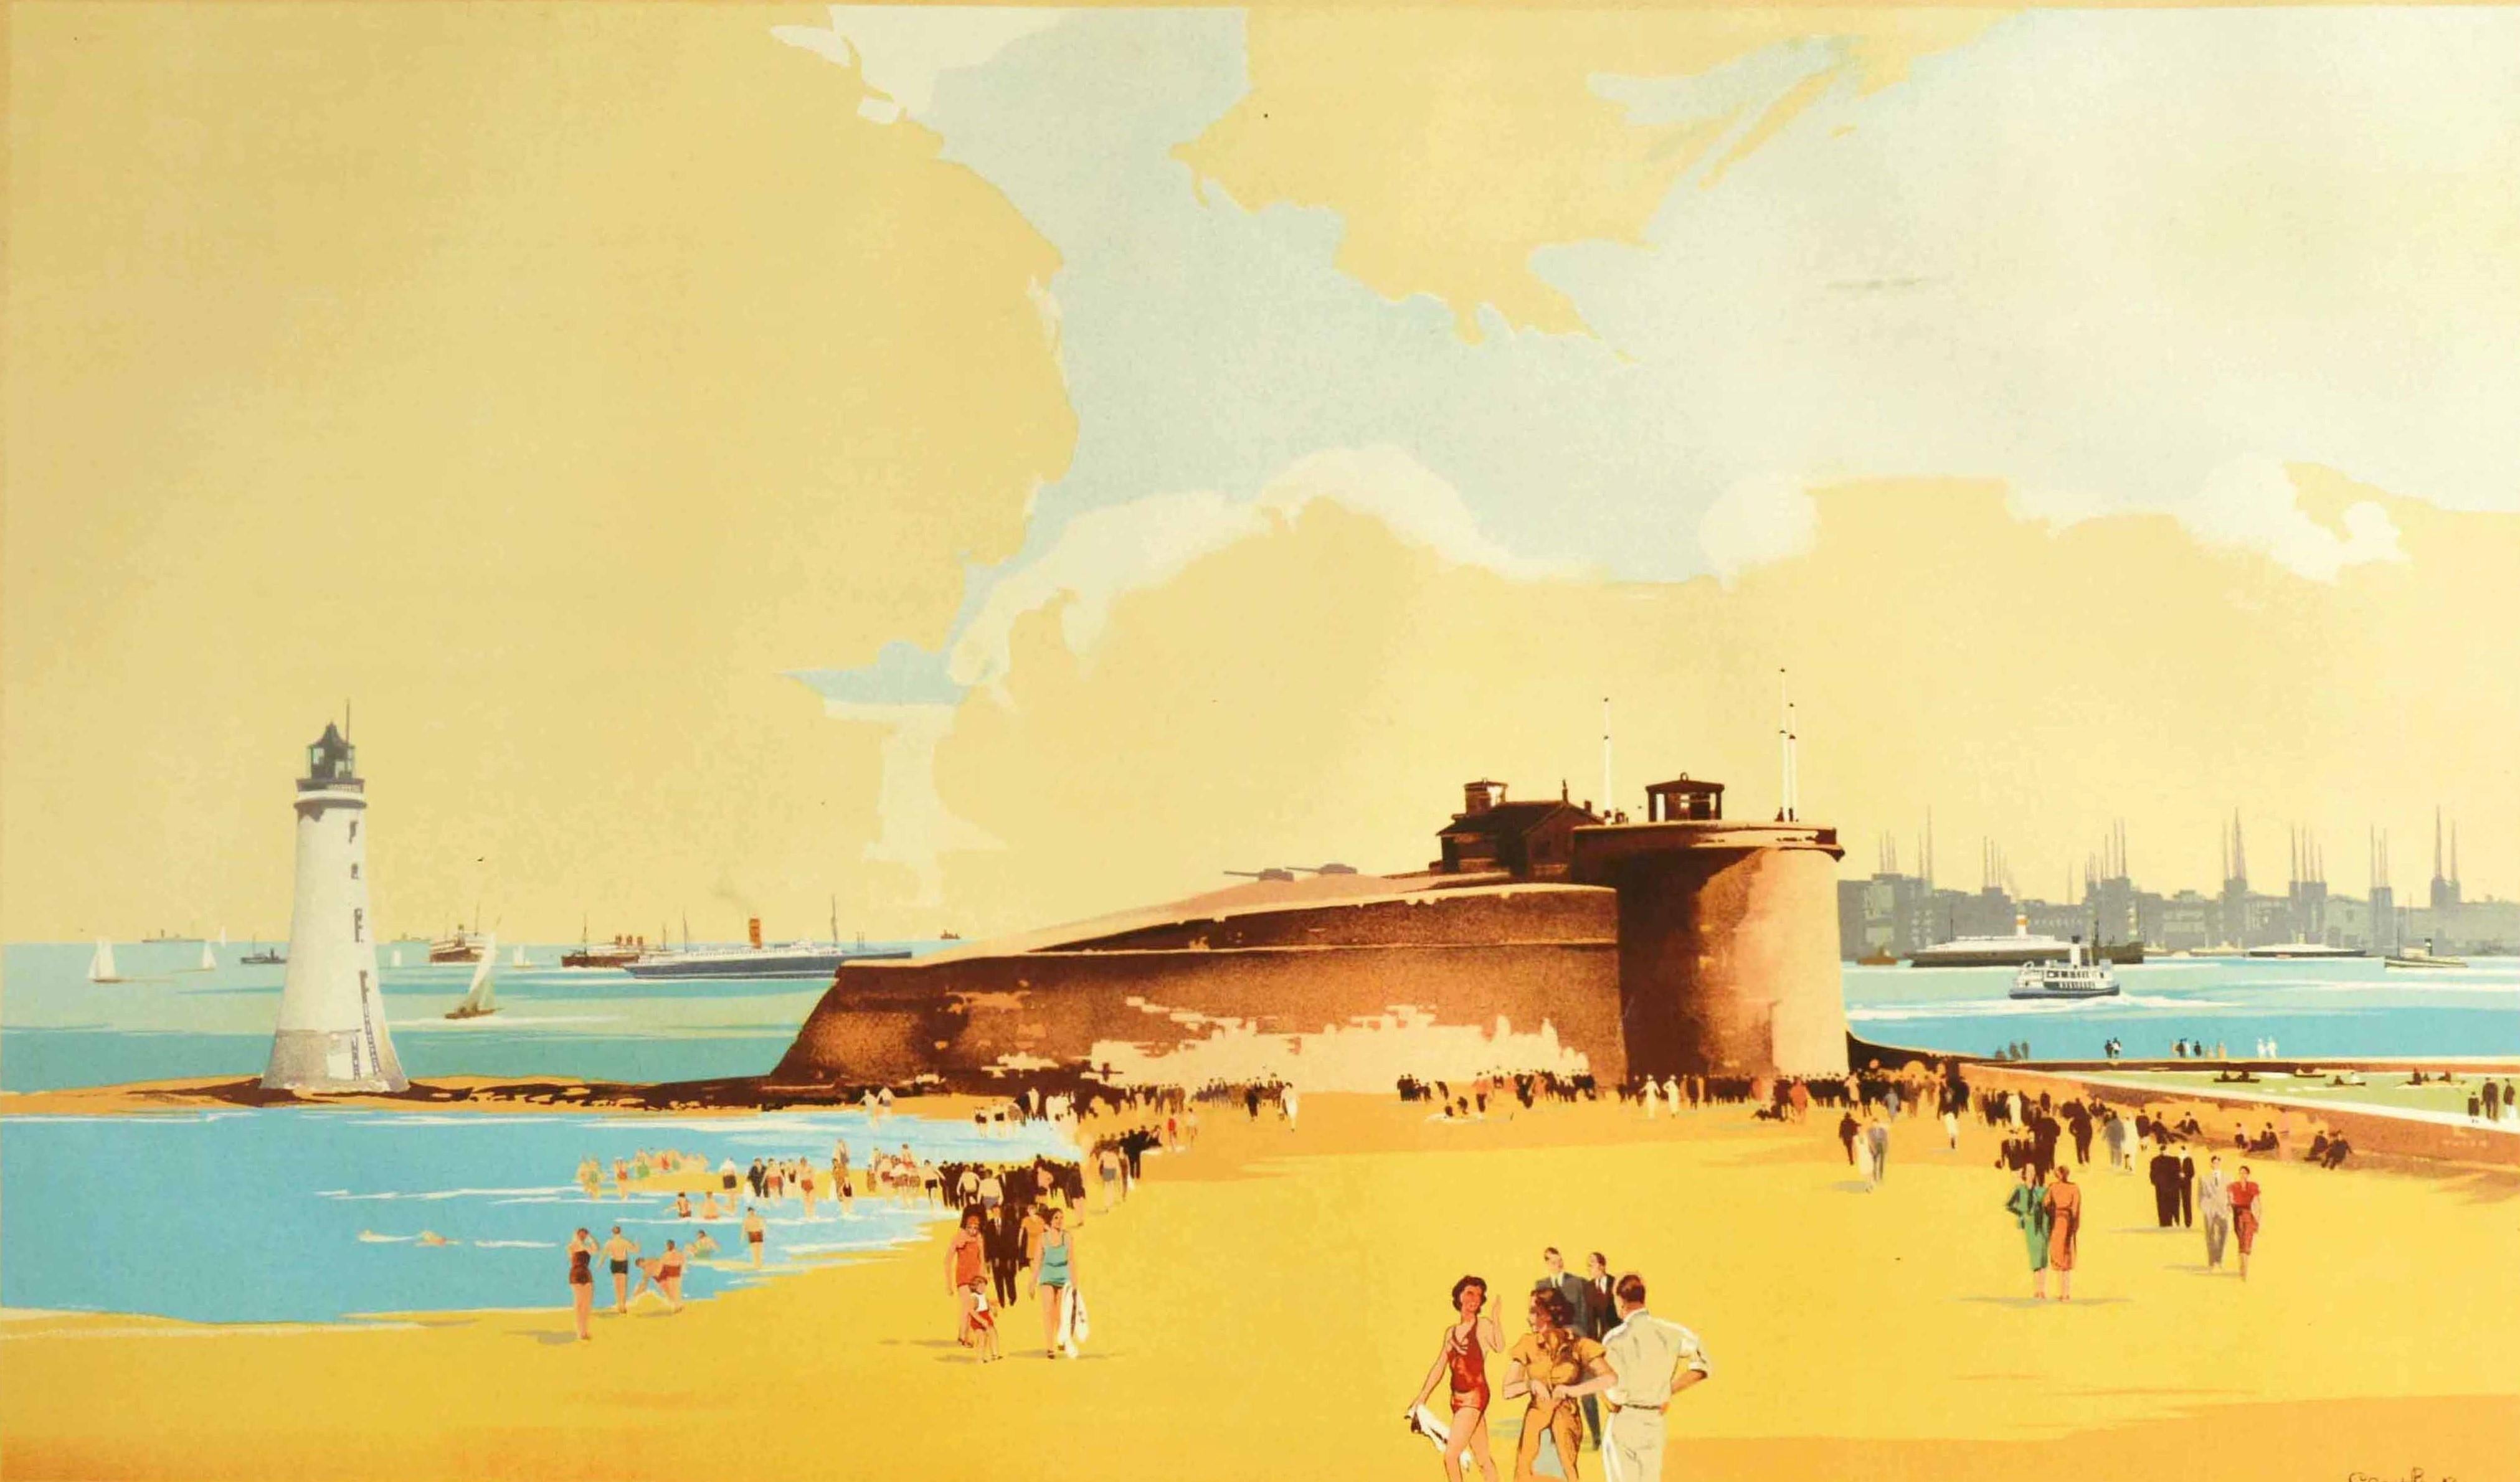 Original vintage train travel poster for New Brighton and Wallasey served by the LMS London Midland & Scottish railway featuring a great image by the notable painter and poster artist Claude Buckle (1905-1973) showing people walking along a sandy